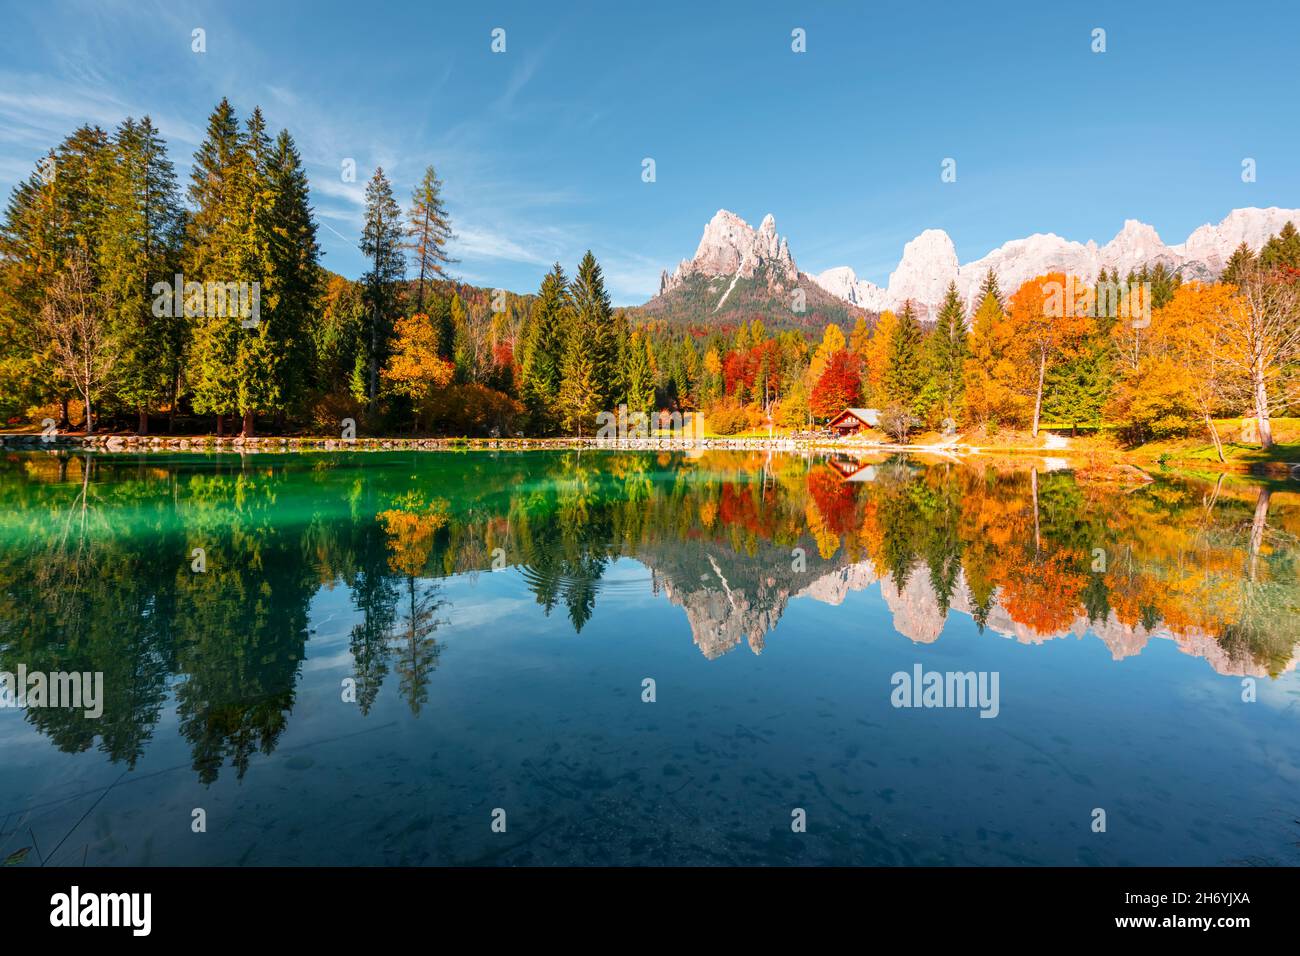 Picturesque view at autumn Welsperg lake in Dolomite Alps. Canali Valley, Primiero San Martino di Castrozza, Province of Trento, Italy. Landscape photography Stock Photo